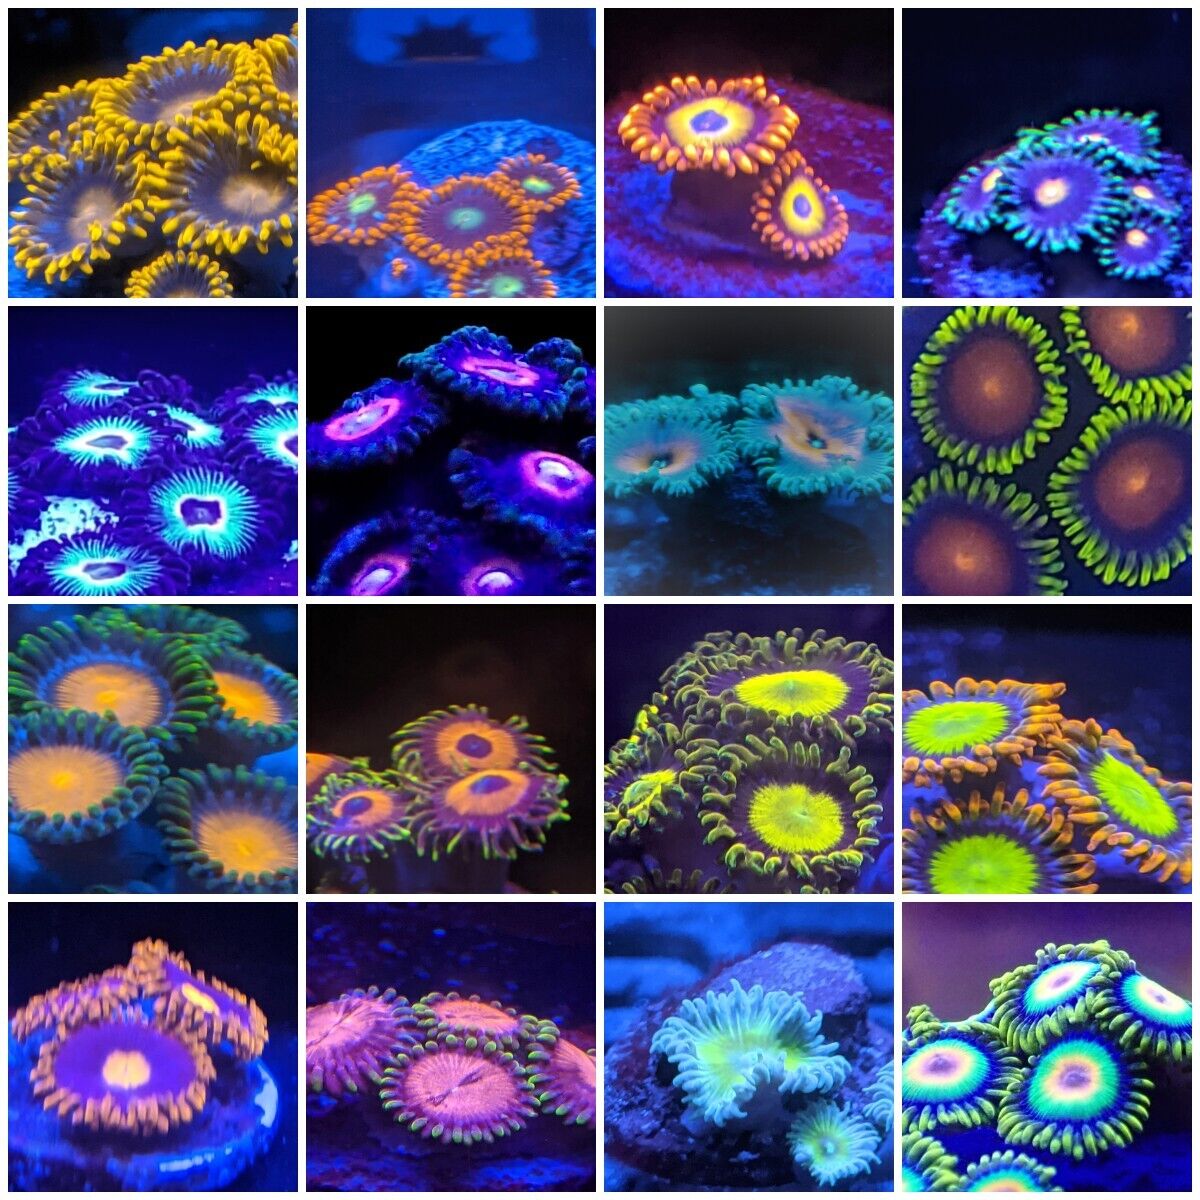 Zoa Pack of 6 different Types of Colorful Zoa by Zoa.World with 